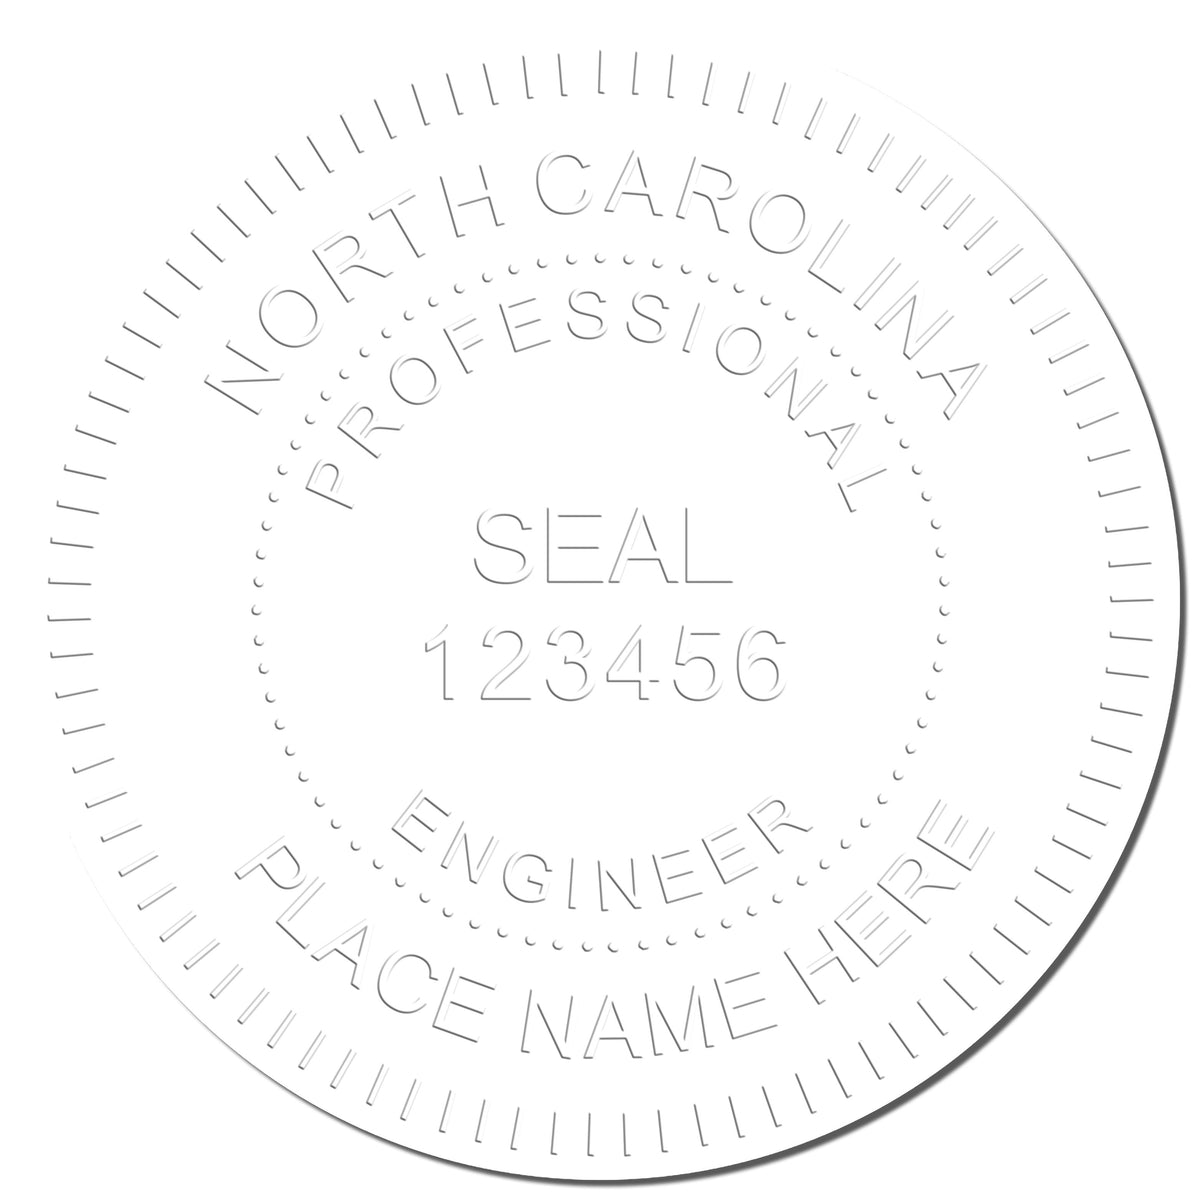 A photograph of the Handheld North Carolina Professional Engineer Embosser stamp impression reveals a vivid, professional image of the on paper.